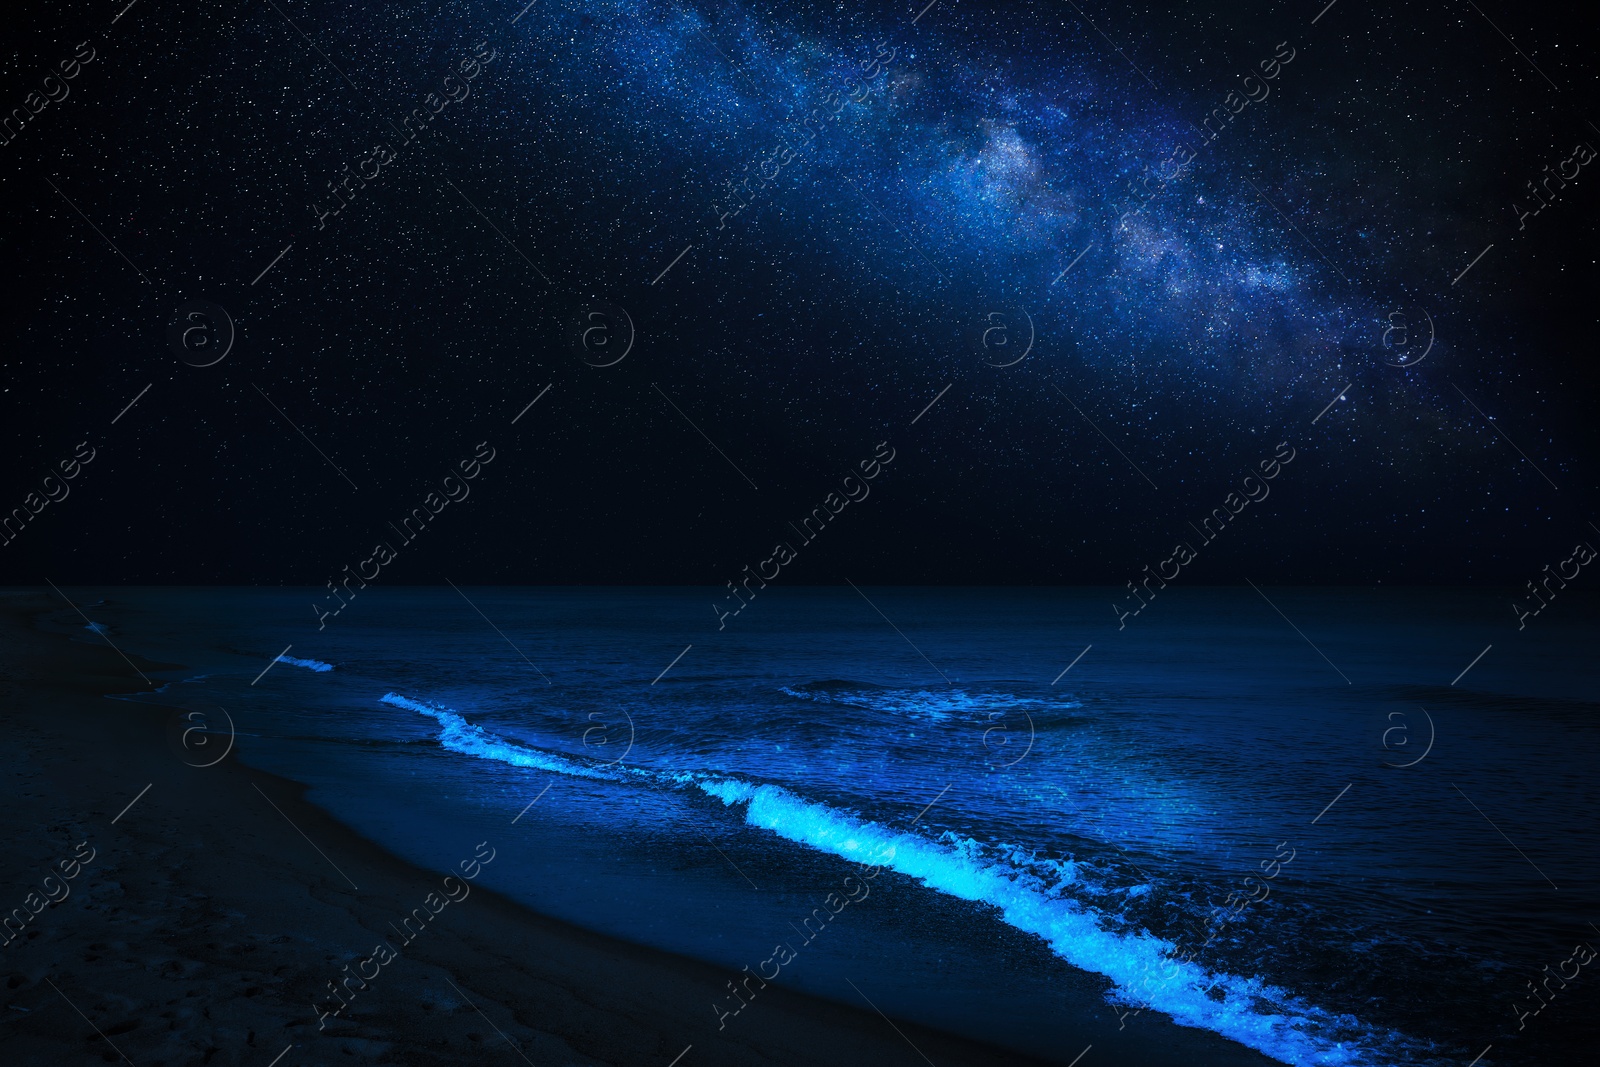 Image of Sea waves rolling onto sandy beach under starry sky at night